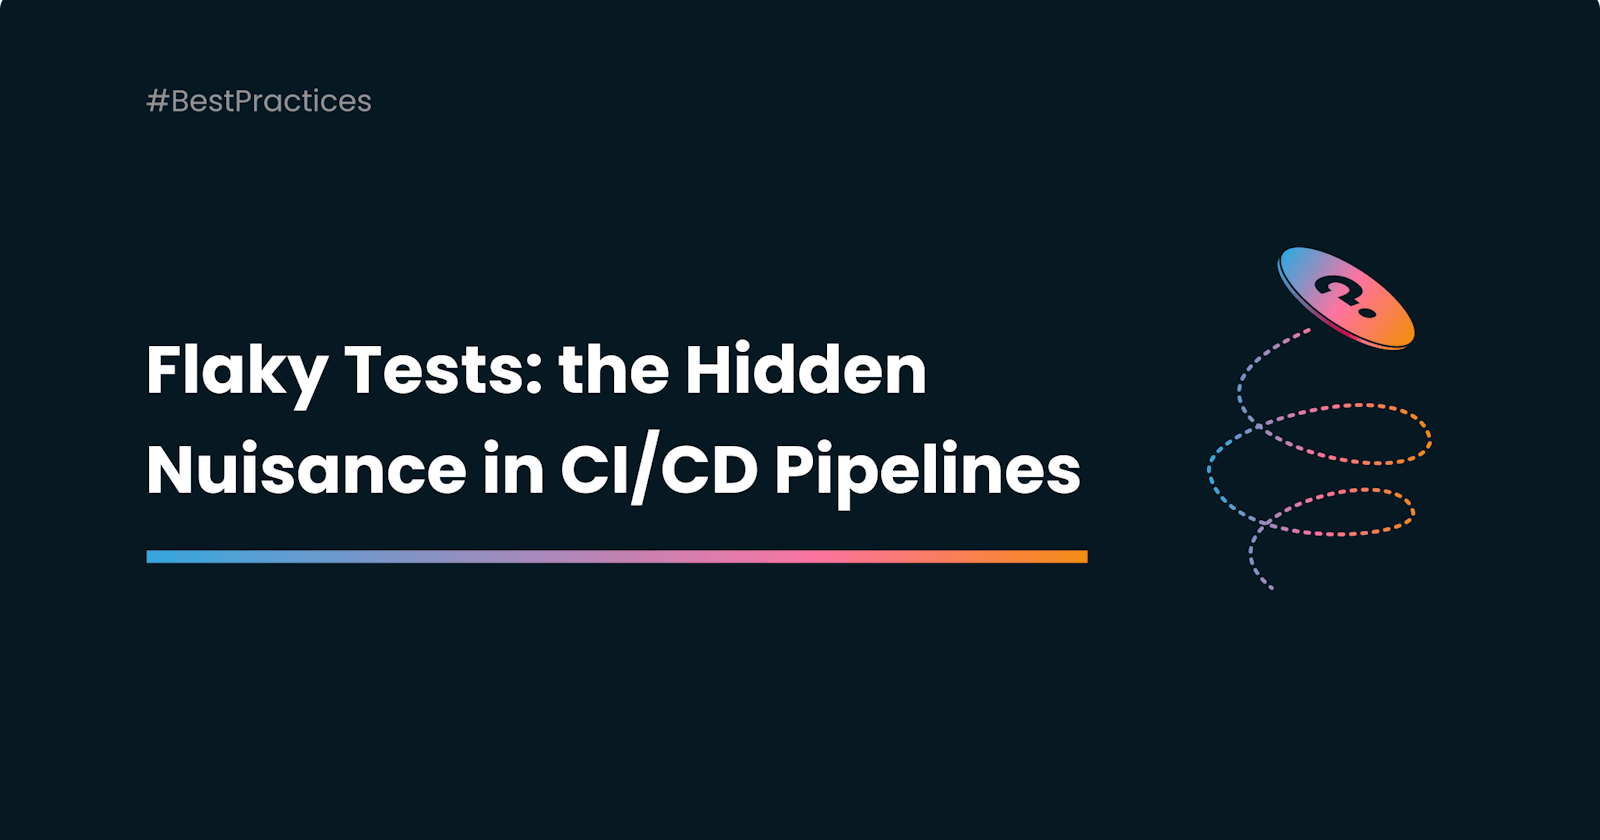 Why Should You Get Rid Of Flaky Tests? Unmasking the Hidden Nuisance in your CI/CD Pipeline